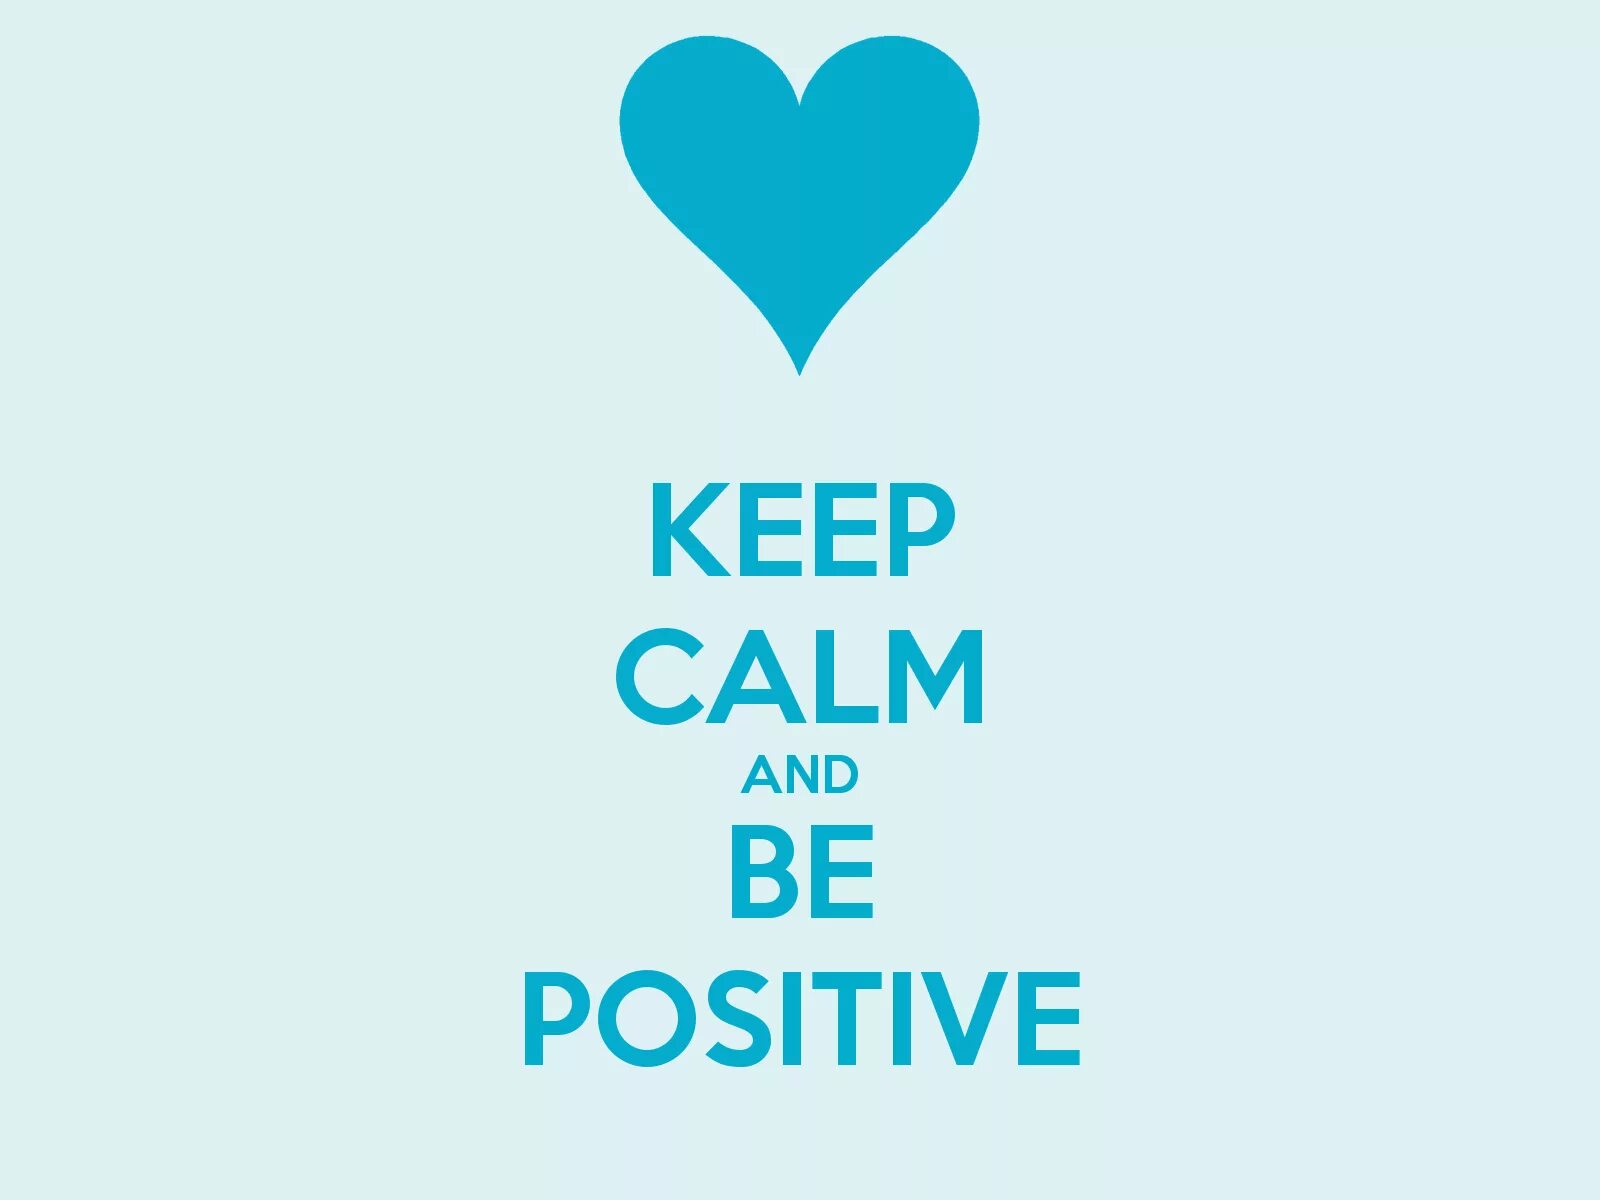 Only positive. Positive картинки. Only positive картинки. Be positive. Be Calm.